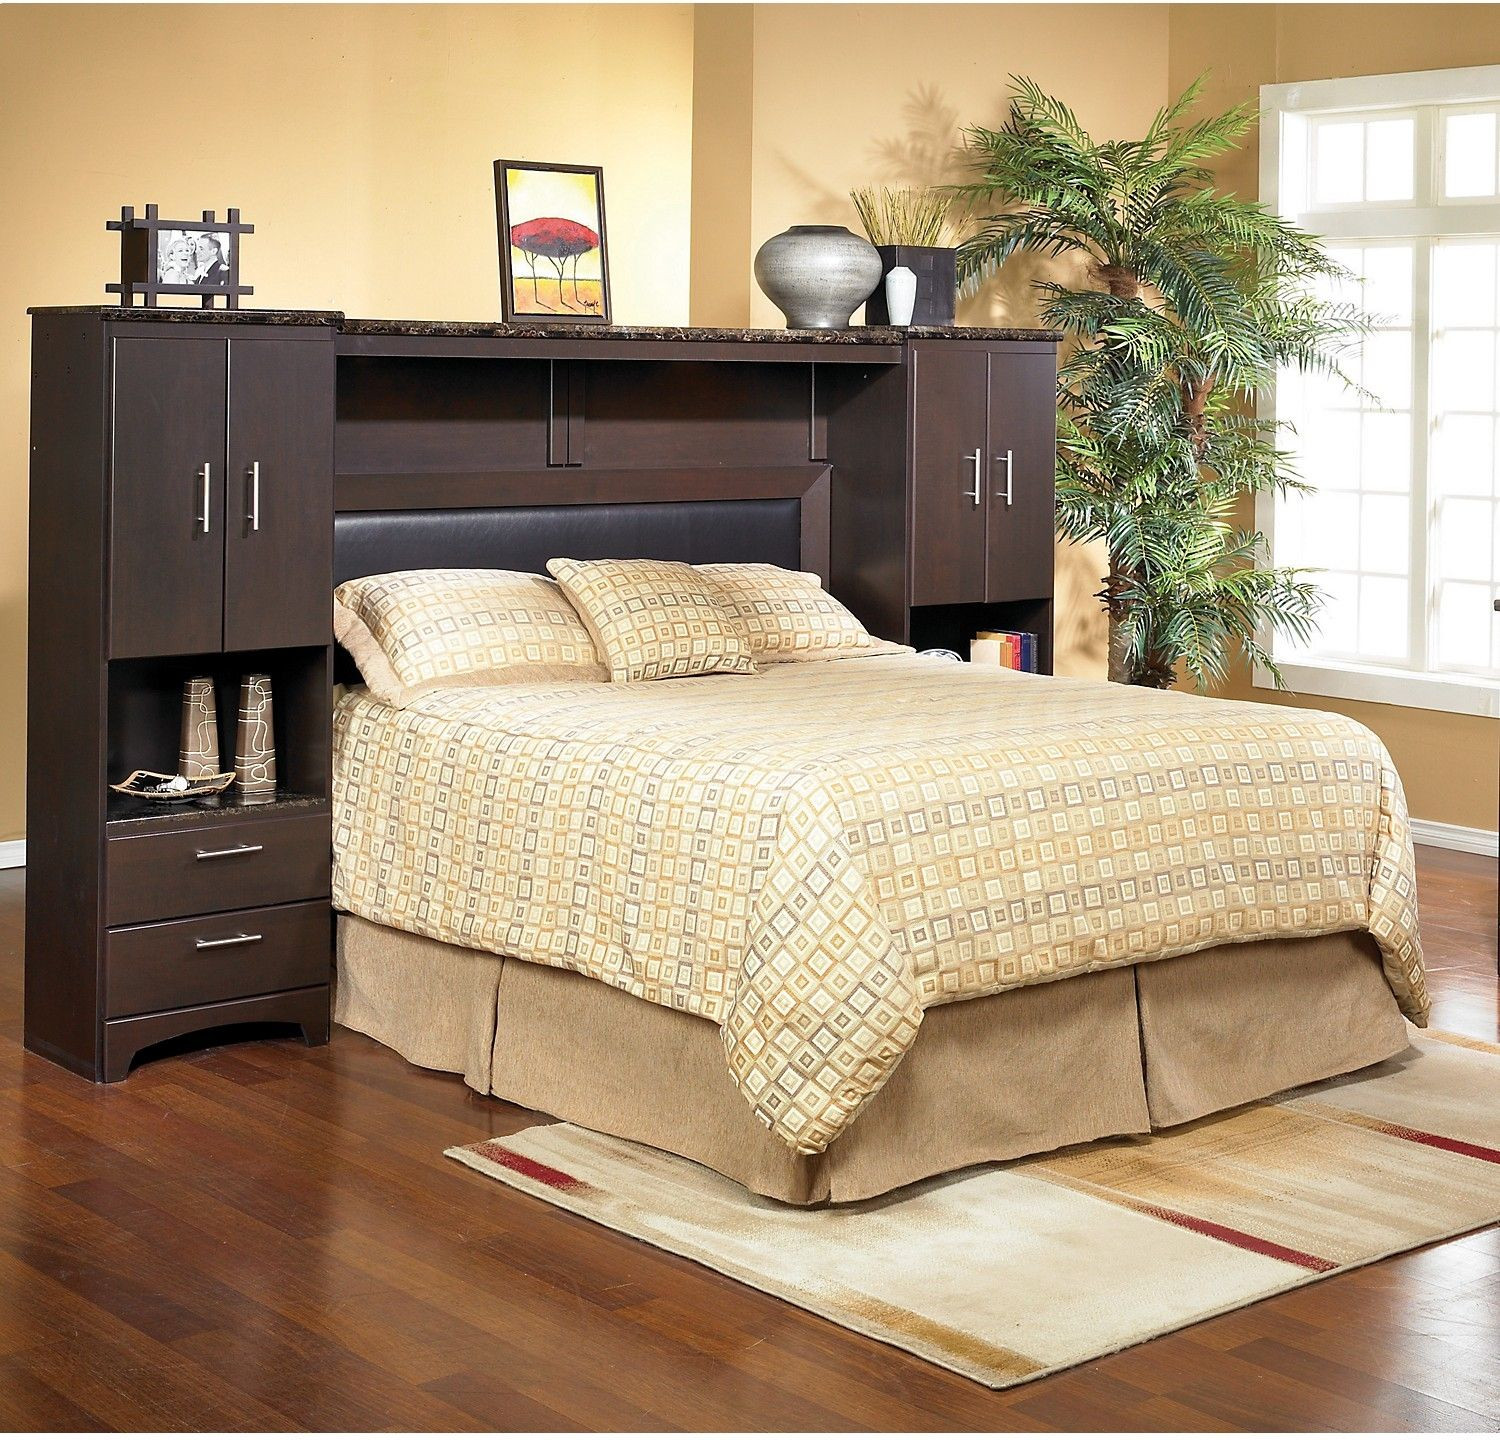 Wall Unit Bedroom Sets
 Oxford Queen Wall Bed with Piers